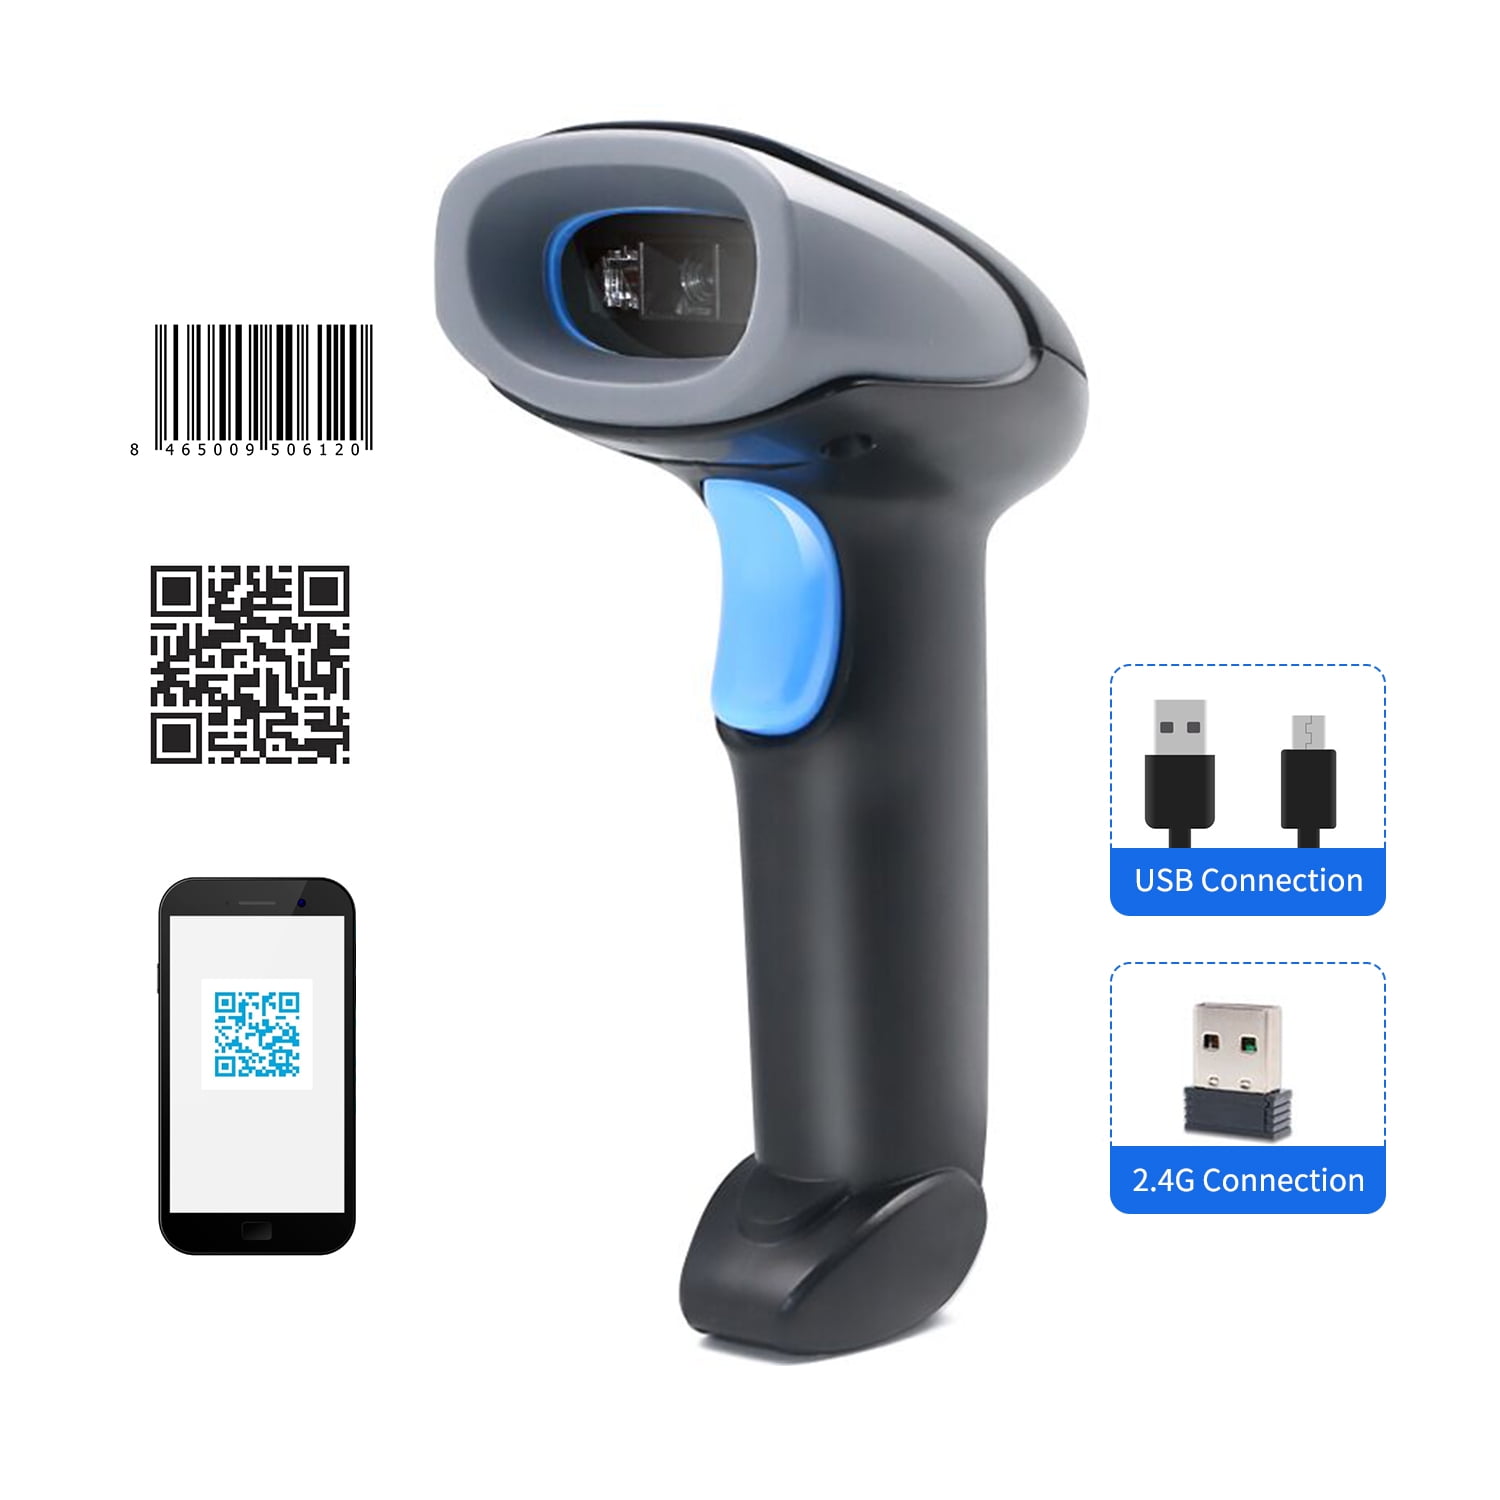 Convenience Store USB Quick Laser Barcode Scanner Reader Handheld Barcode Reader Scanner for Computer Warehouse Inventory Supermarket Library Book Barcode Scanner Wireless Store 